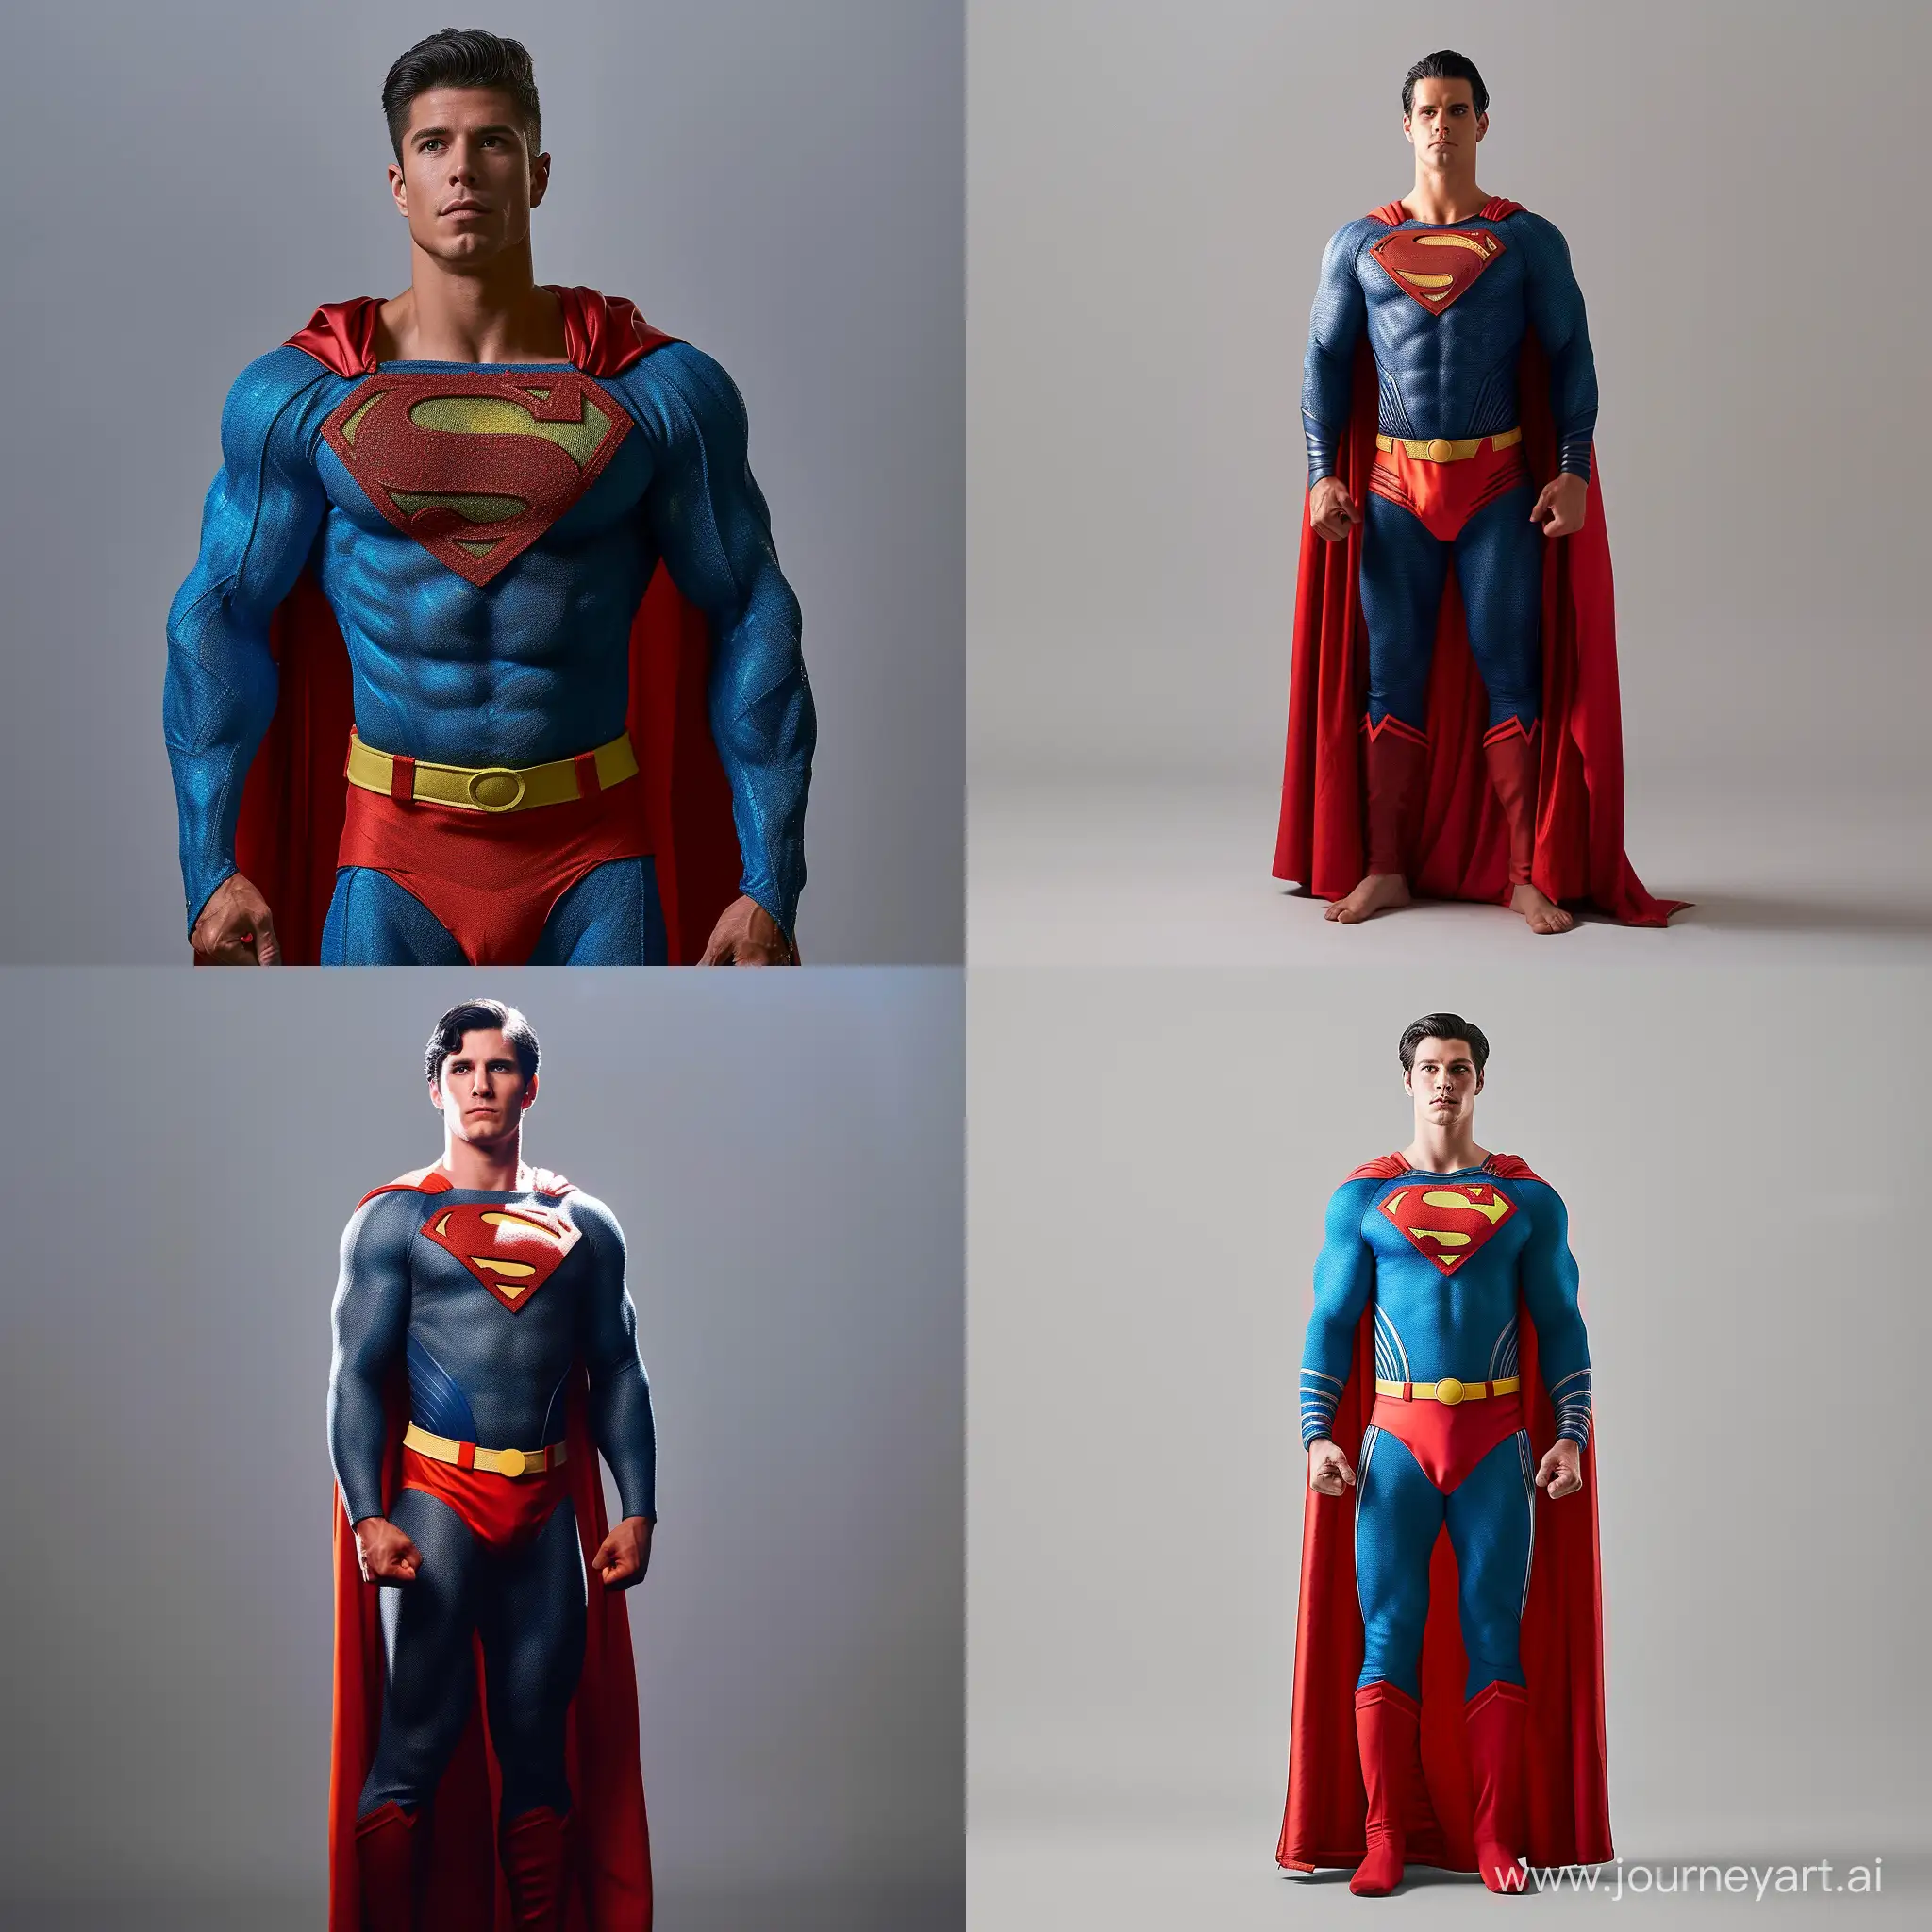 Dynamic-Superman-Costume-Portrait-Powerful-Male-Model-in-FullLength-View